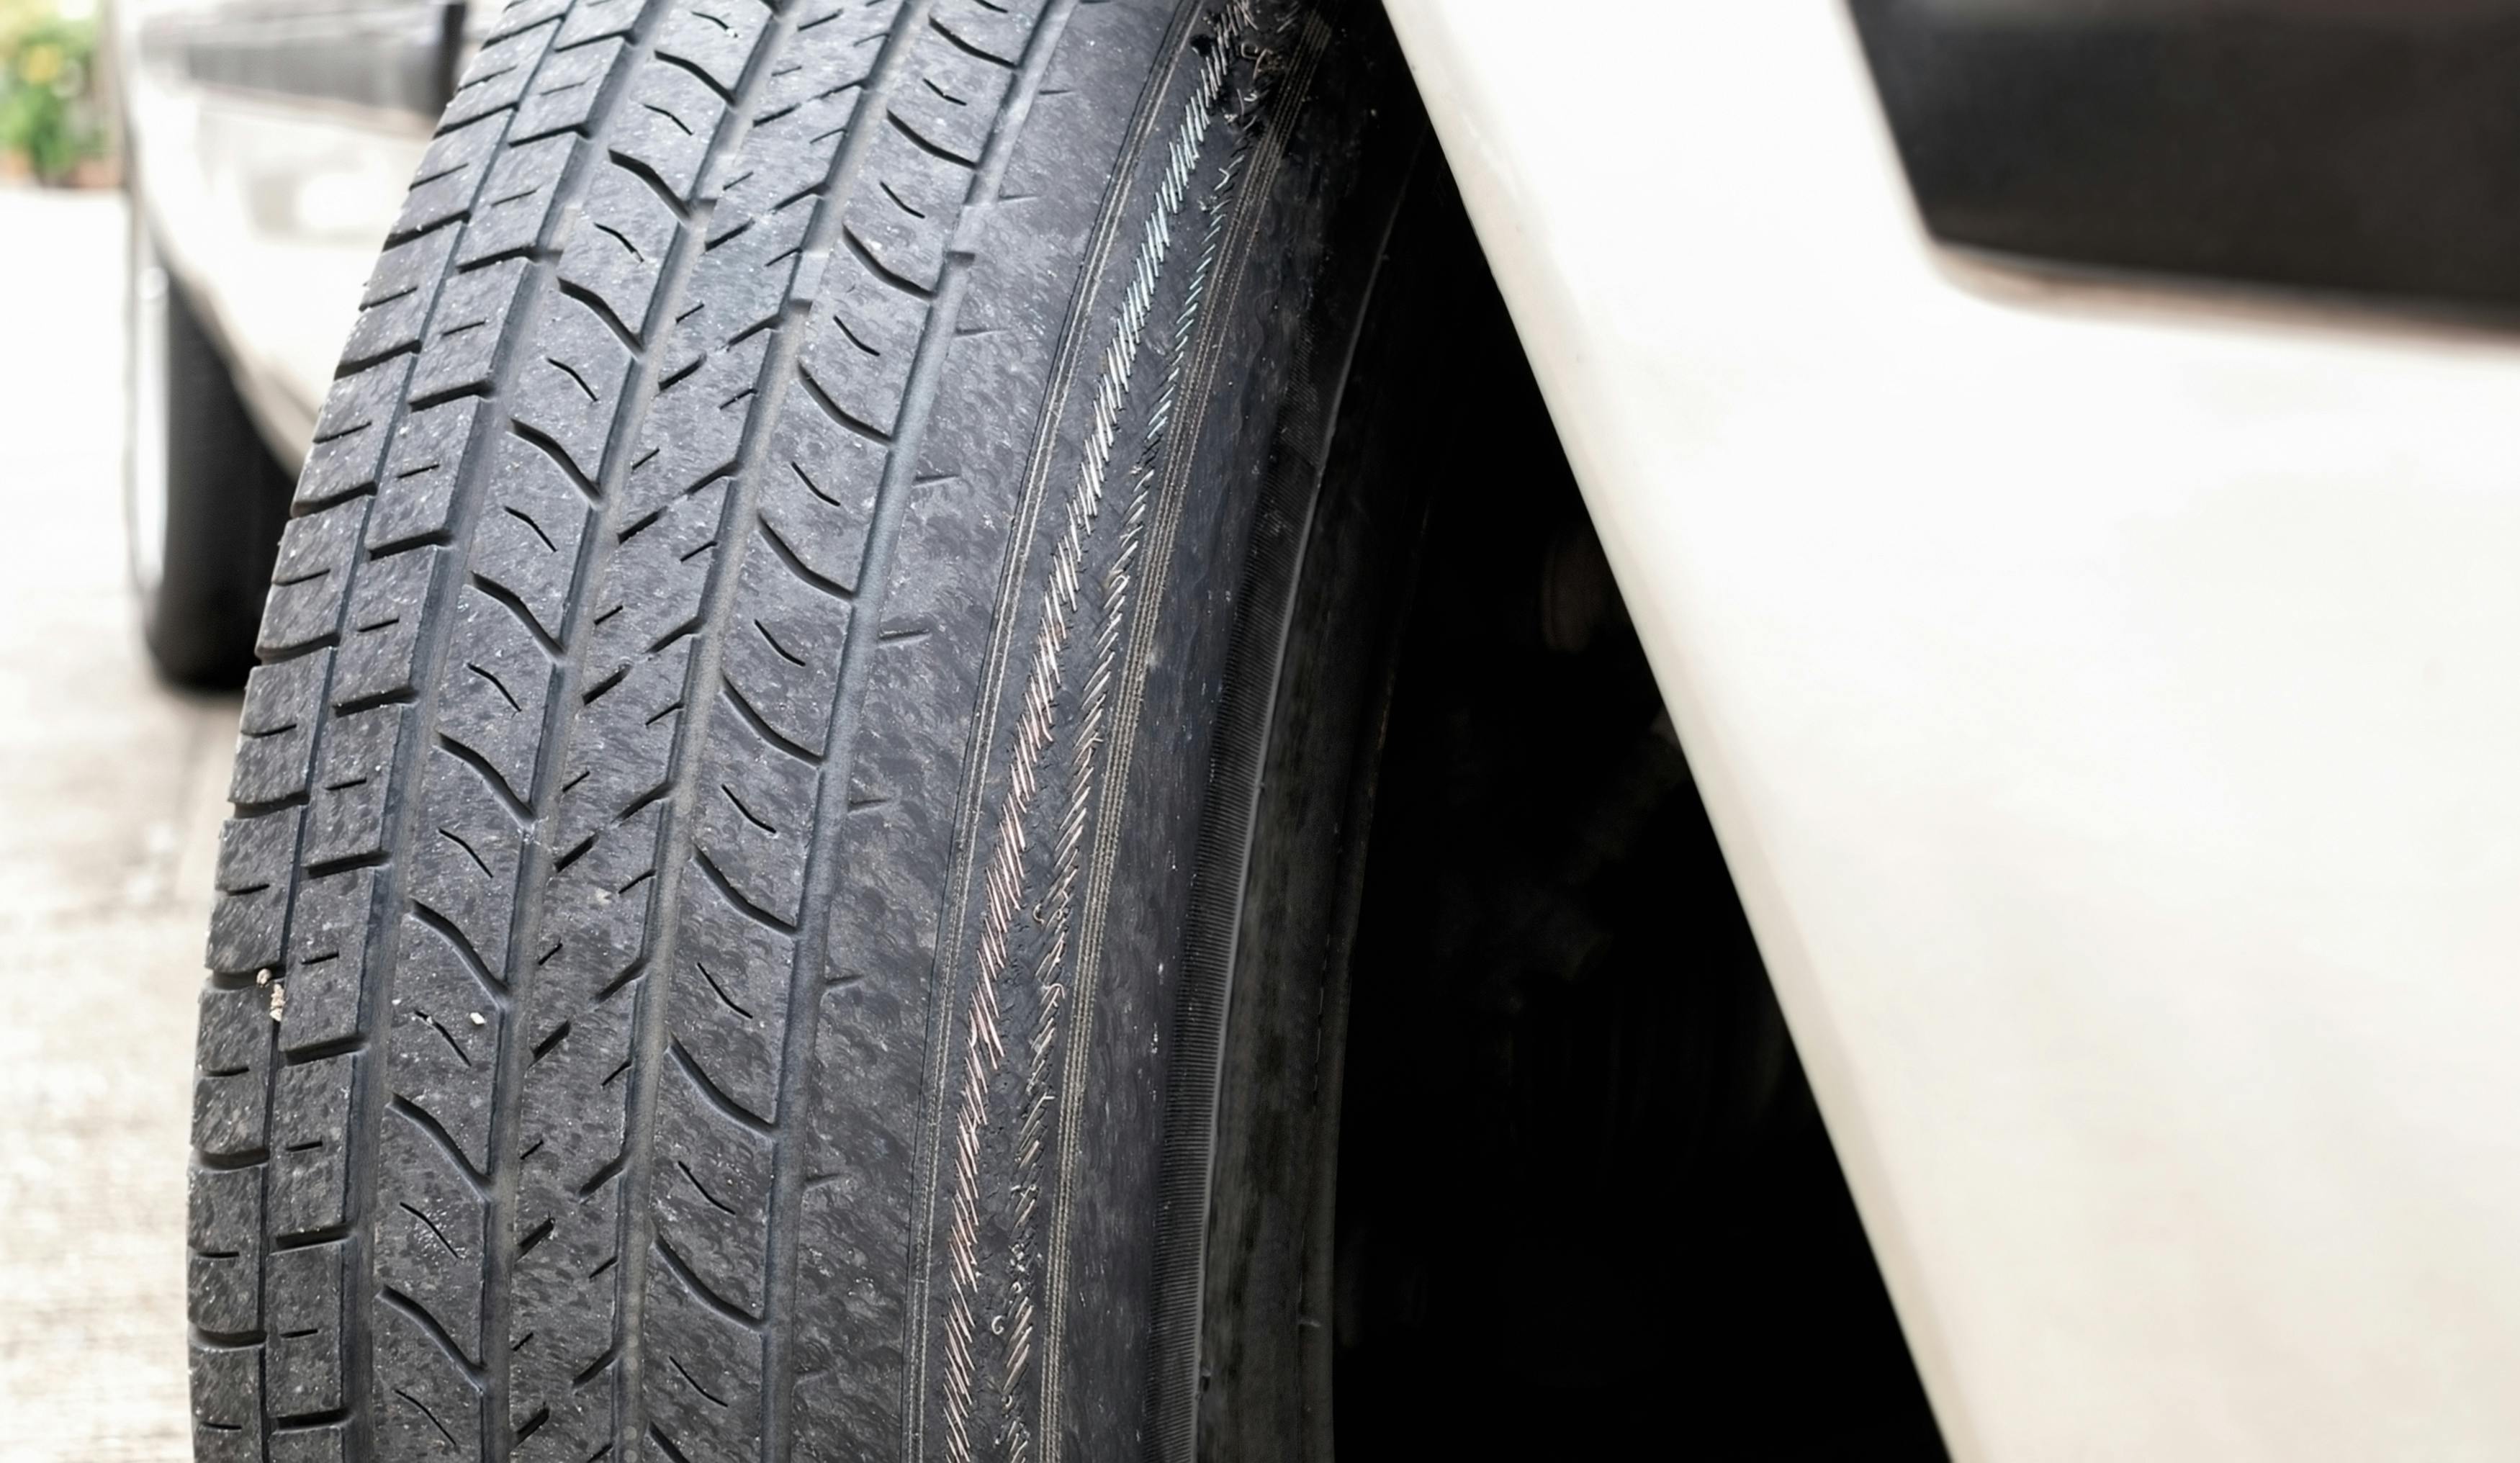 A worn car tyre caused by excessive wheel alignment toe-out